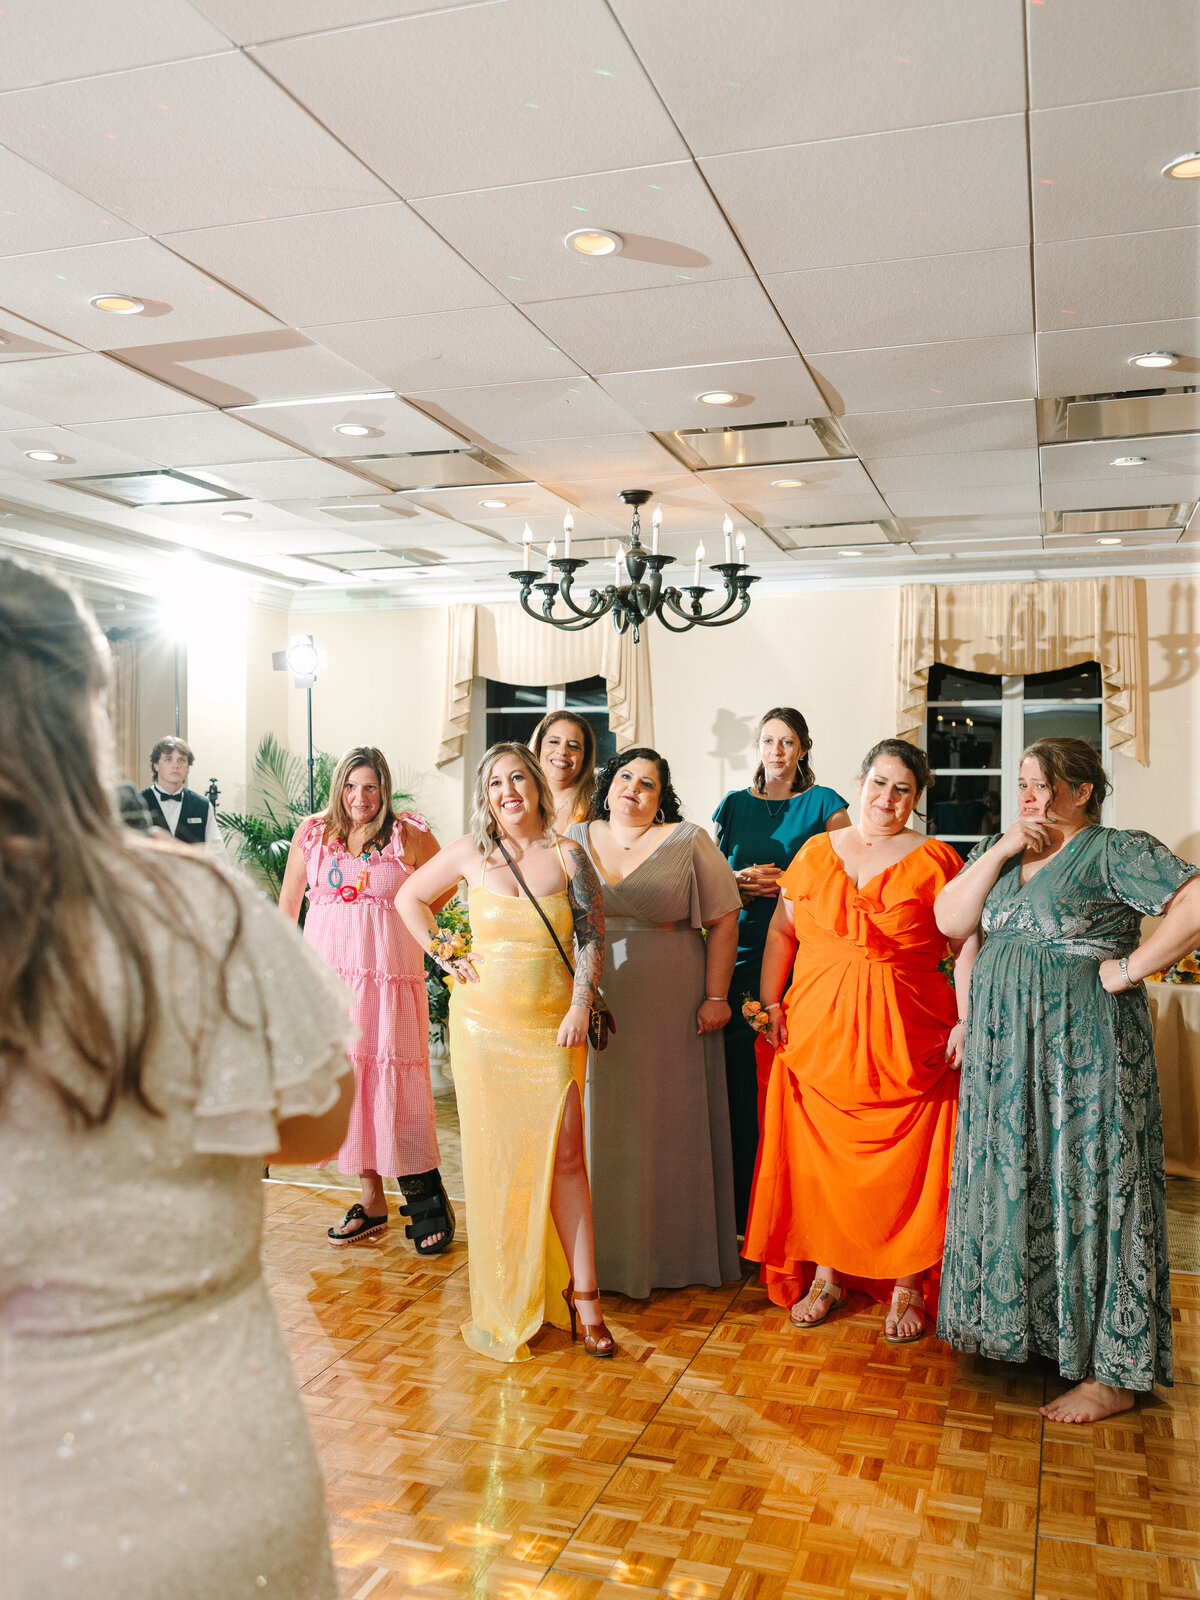 LAURA PEREZ PHOTOGRAPHY LLC EPPING FOREST YACHT CLUB WEDDINGS ADINA AND WES-148